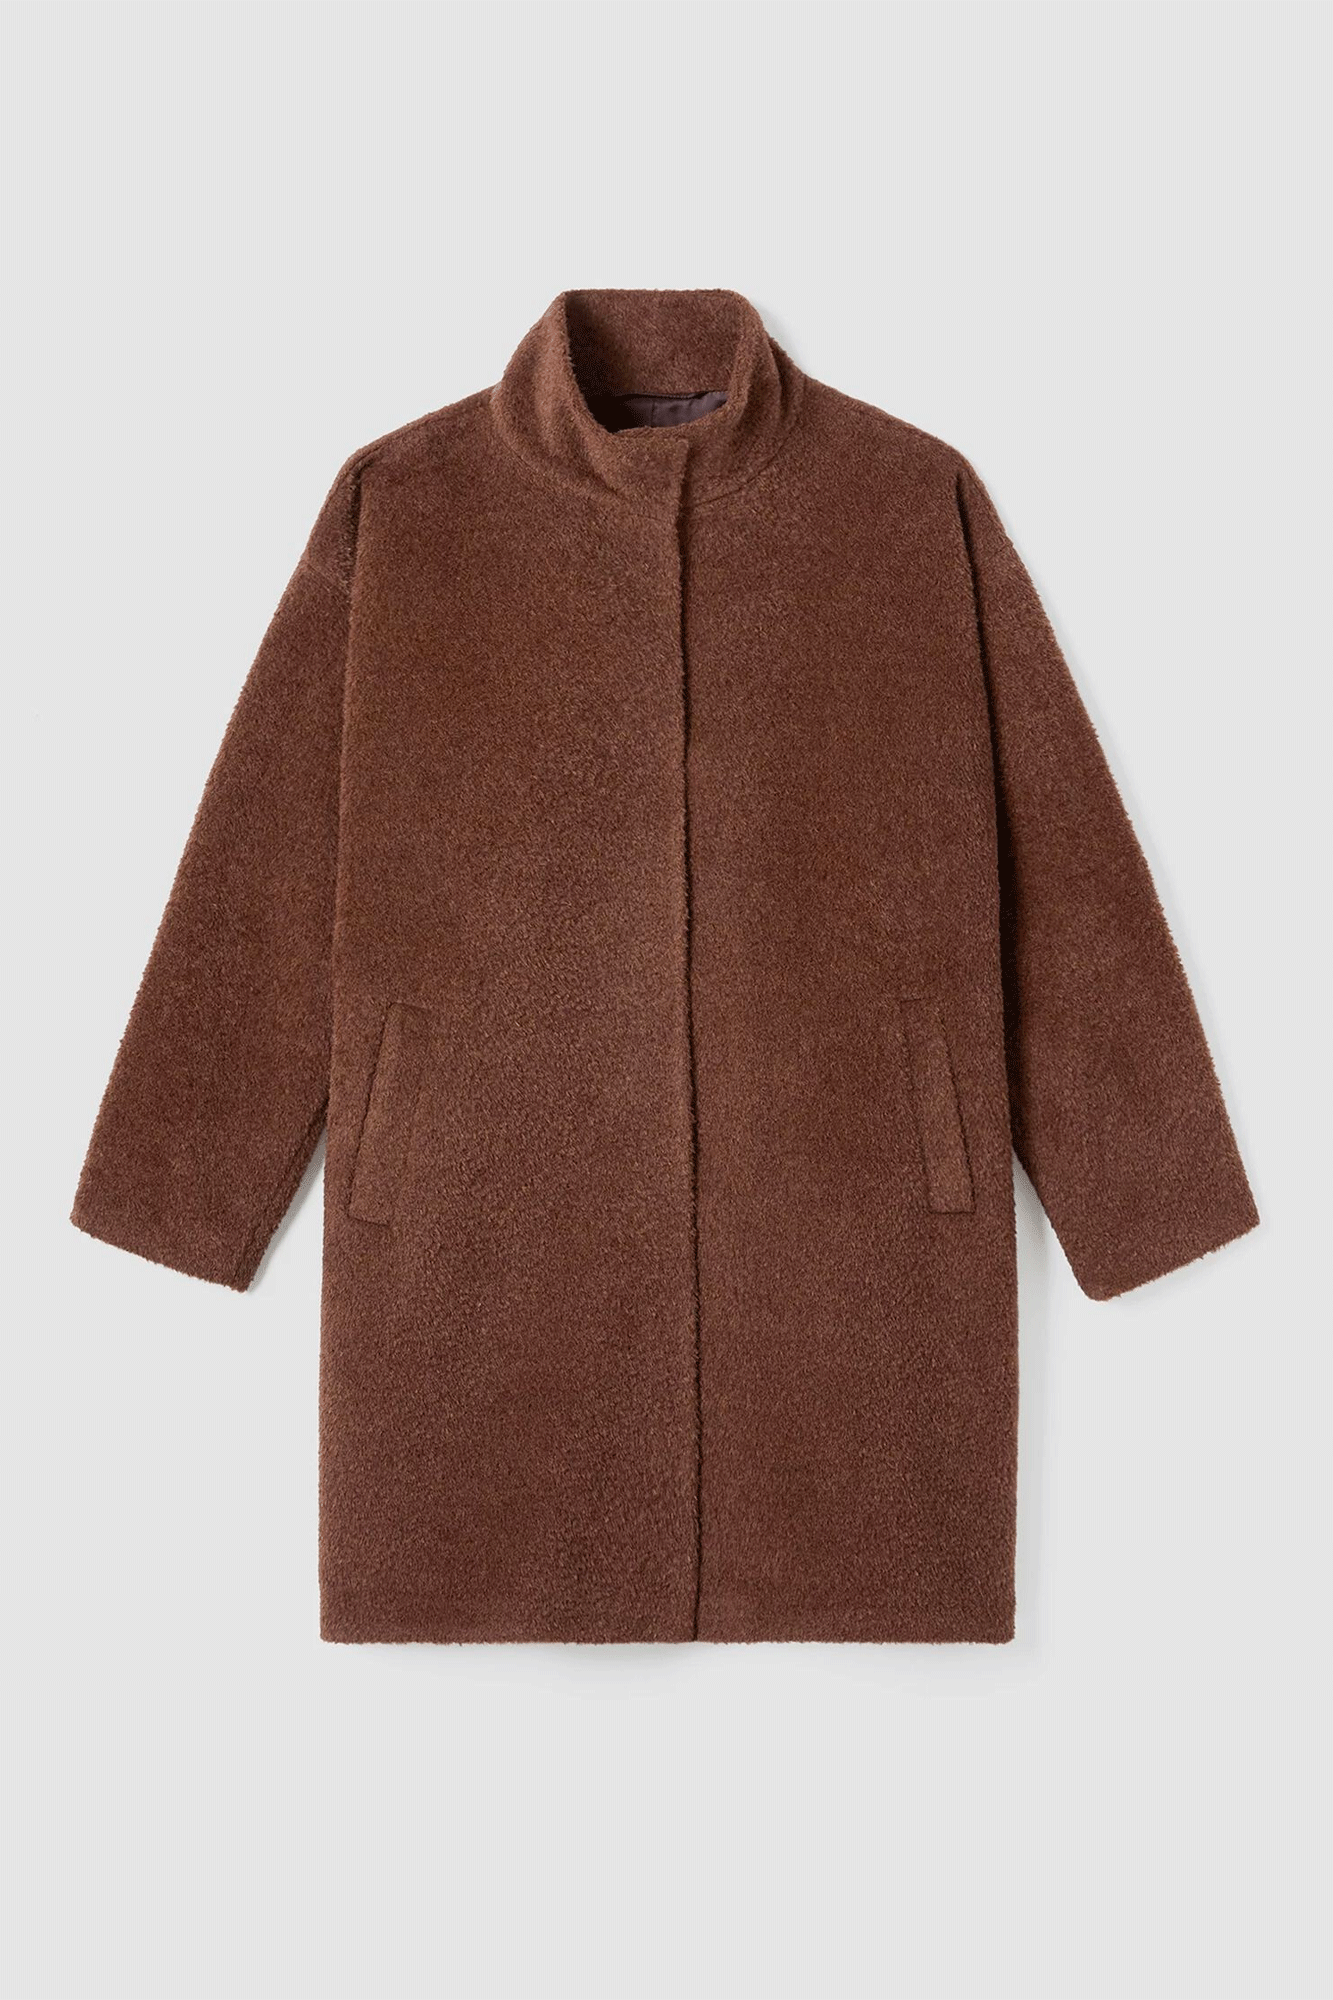 This Stand Collar Coat is a luxurious blend of warmth and lightweight fabric. Crafted with alpaca shearing, it will keep you warm without weighing you down. A stand collar and snap closure give an elegant finish to this timeless piece.